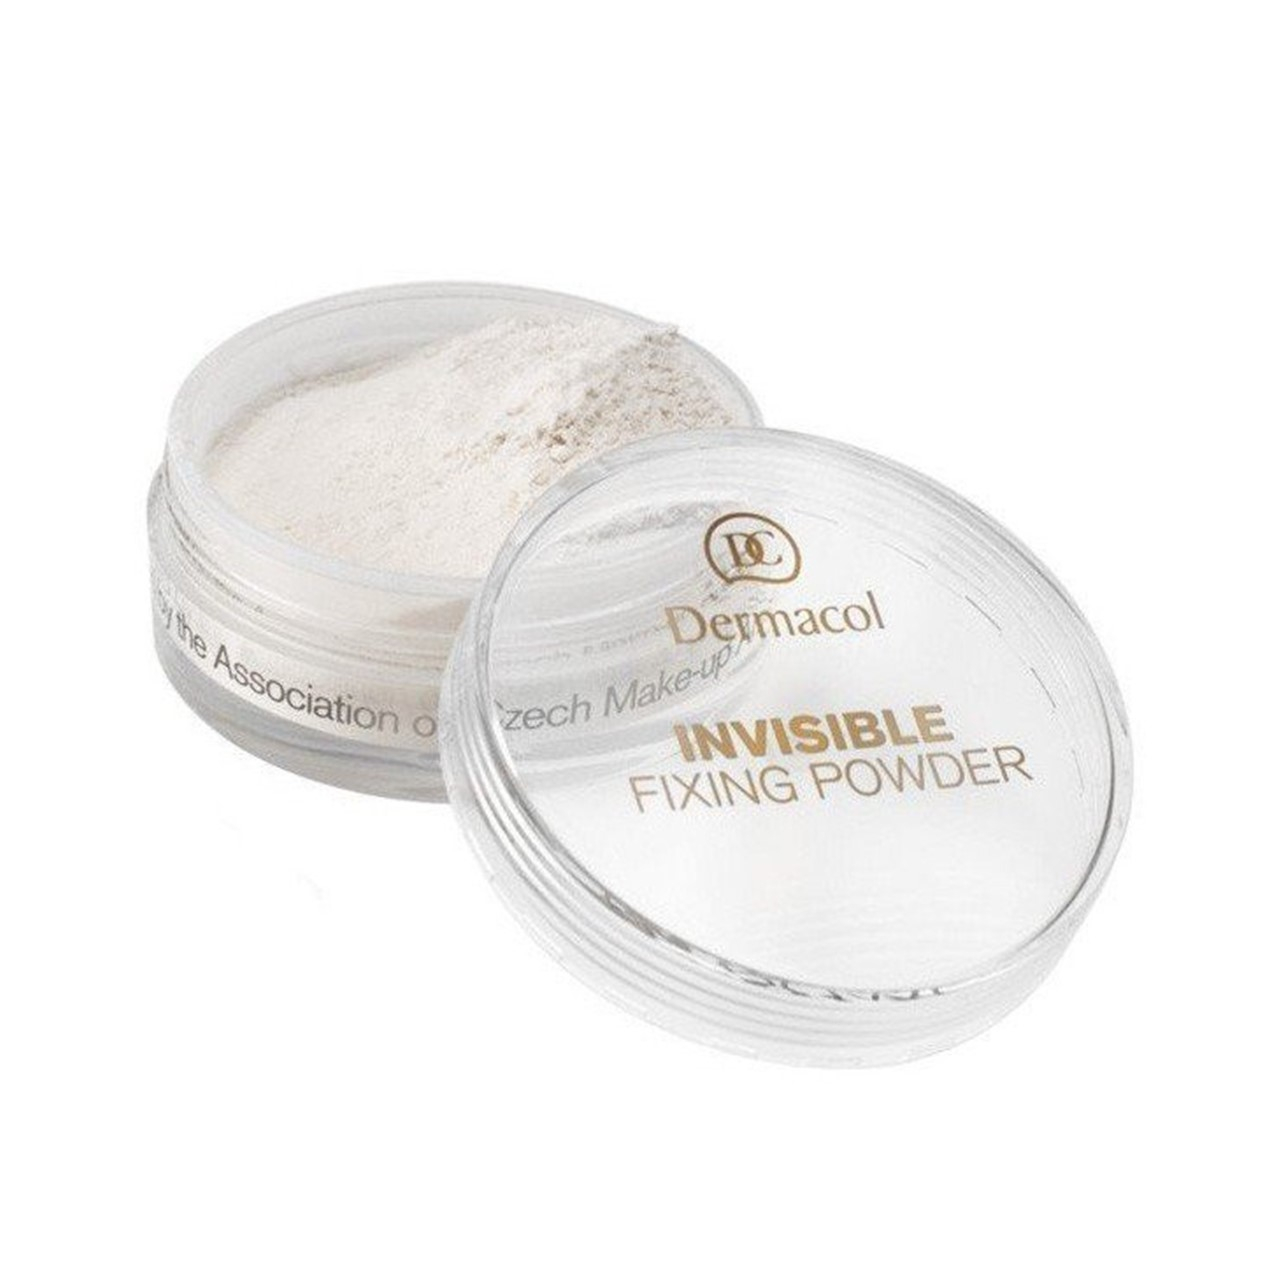 Dermacol Invisible Fixing Powder Light 13g (0.46oz)